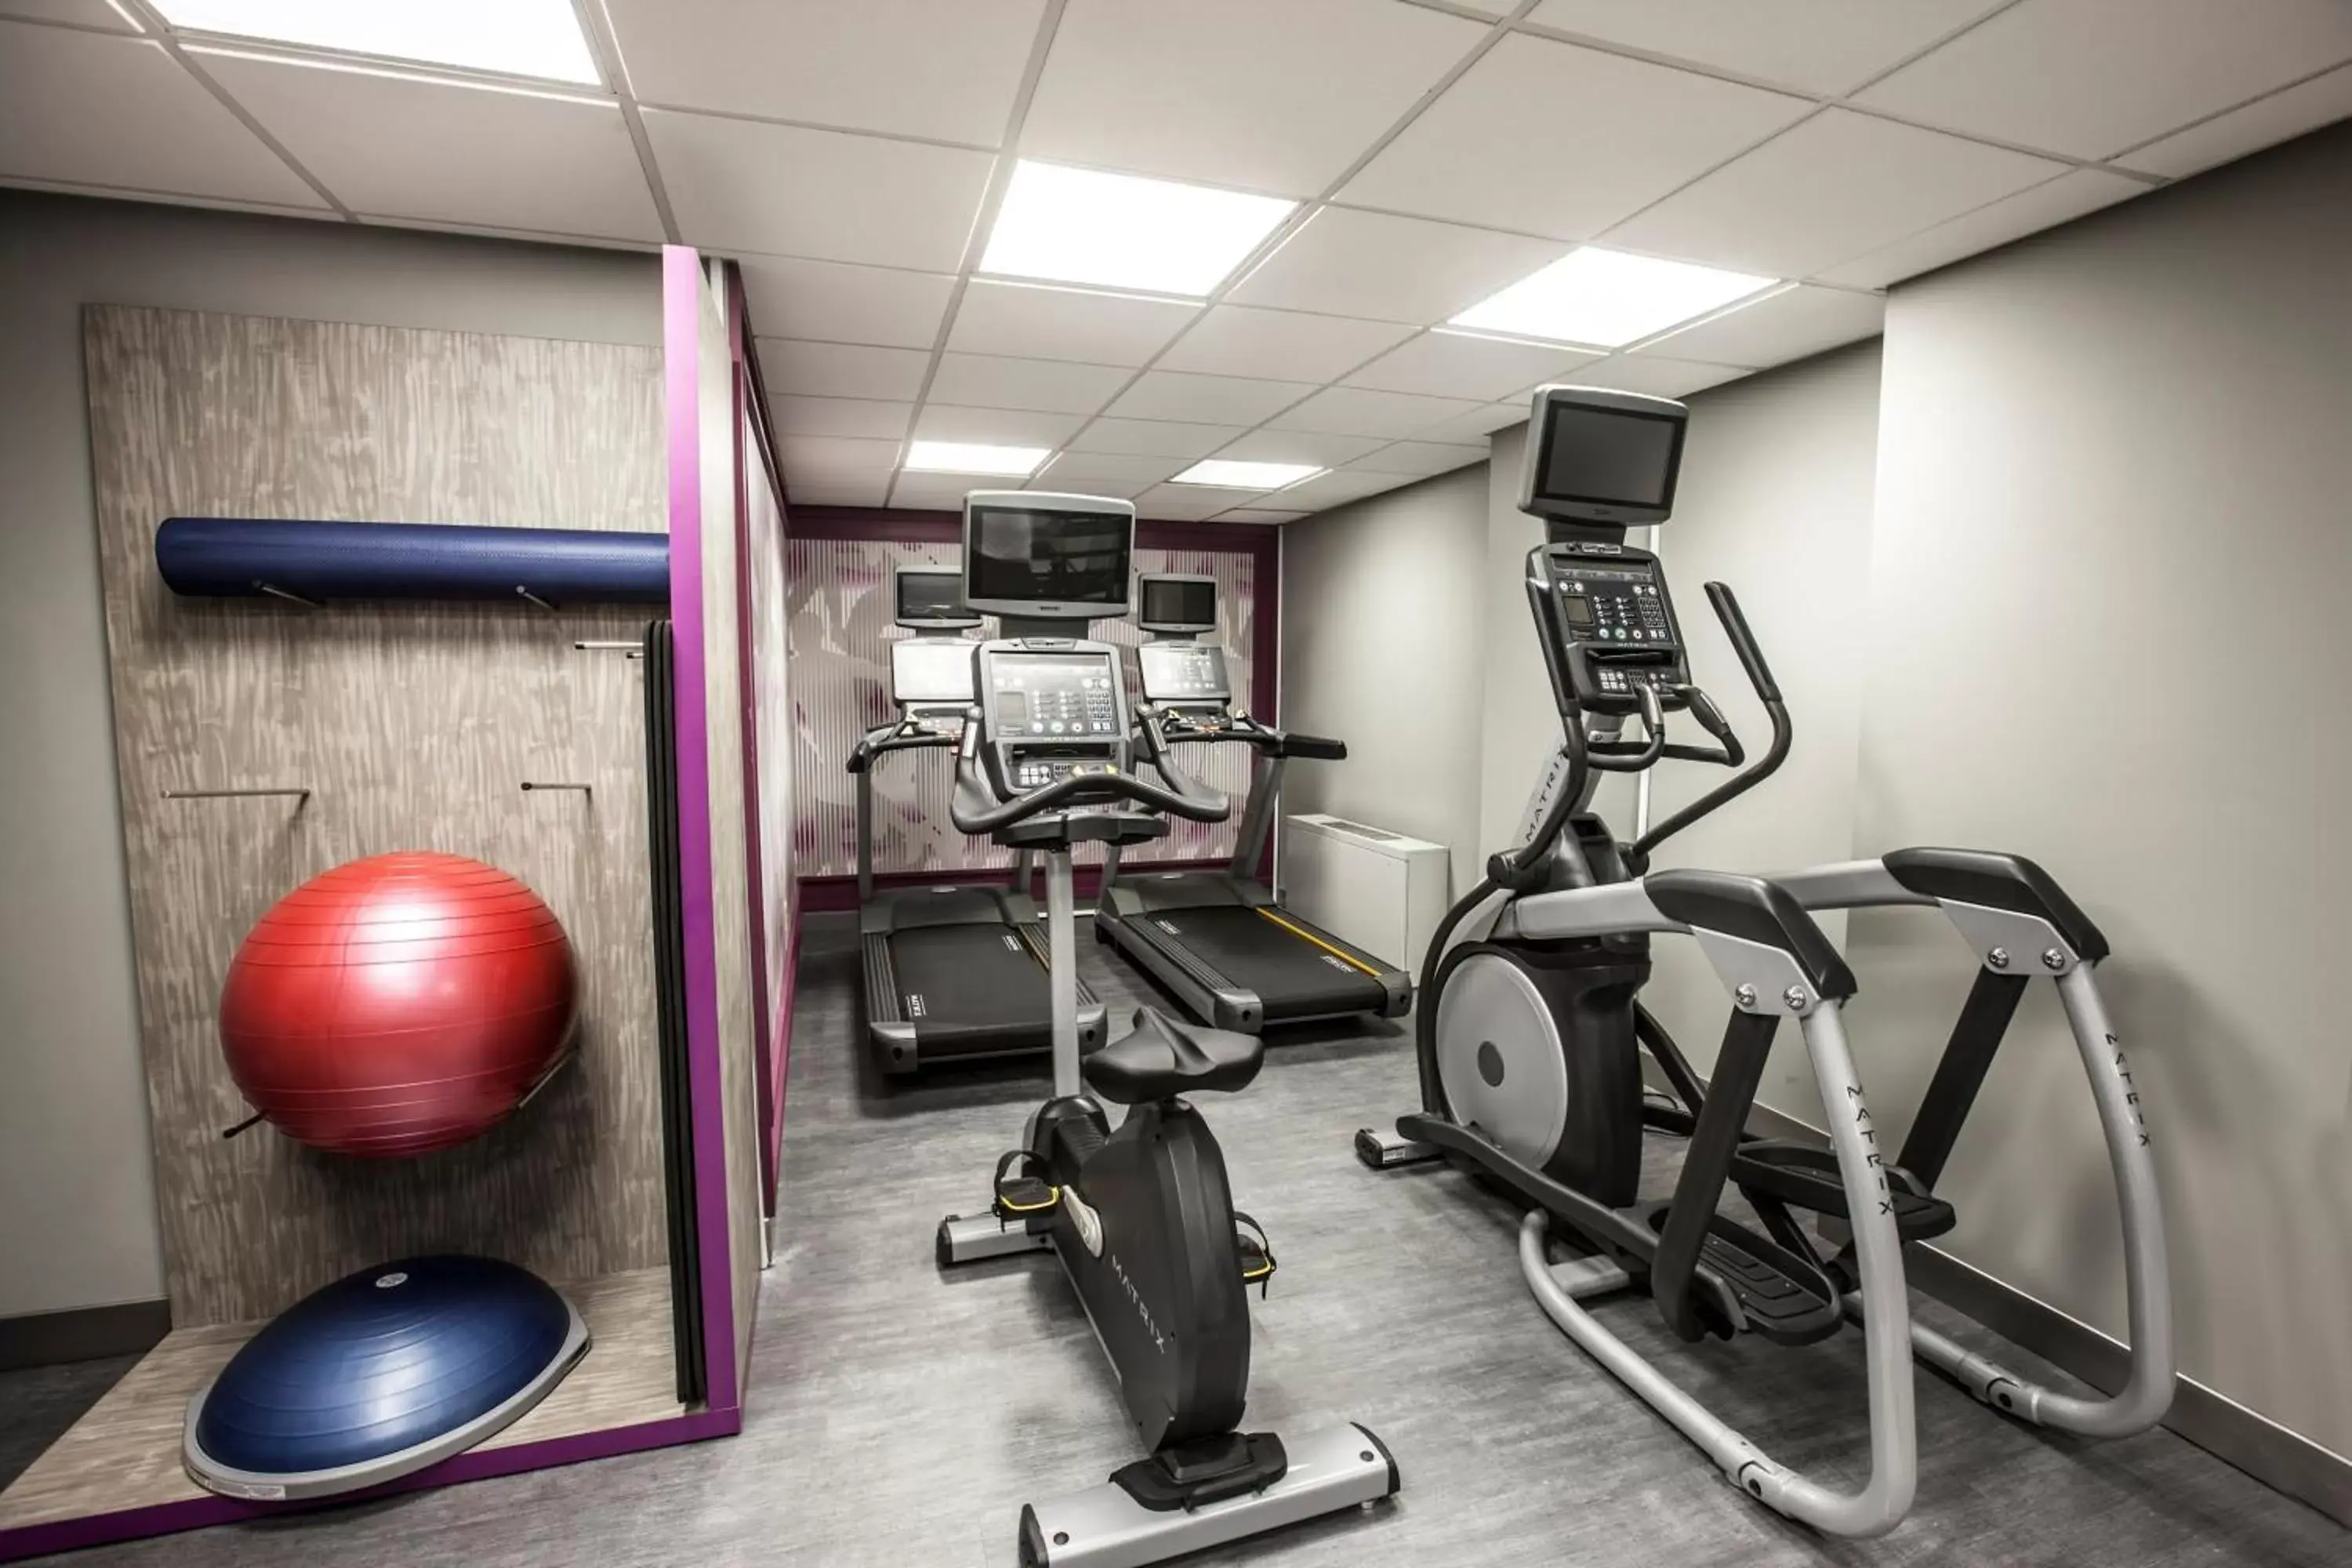 Fitness centre/facilities, Fitness Center/Facilities in Crowne Plaza Hotel-Niagara Falls/Falls View, an IHG Hotel